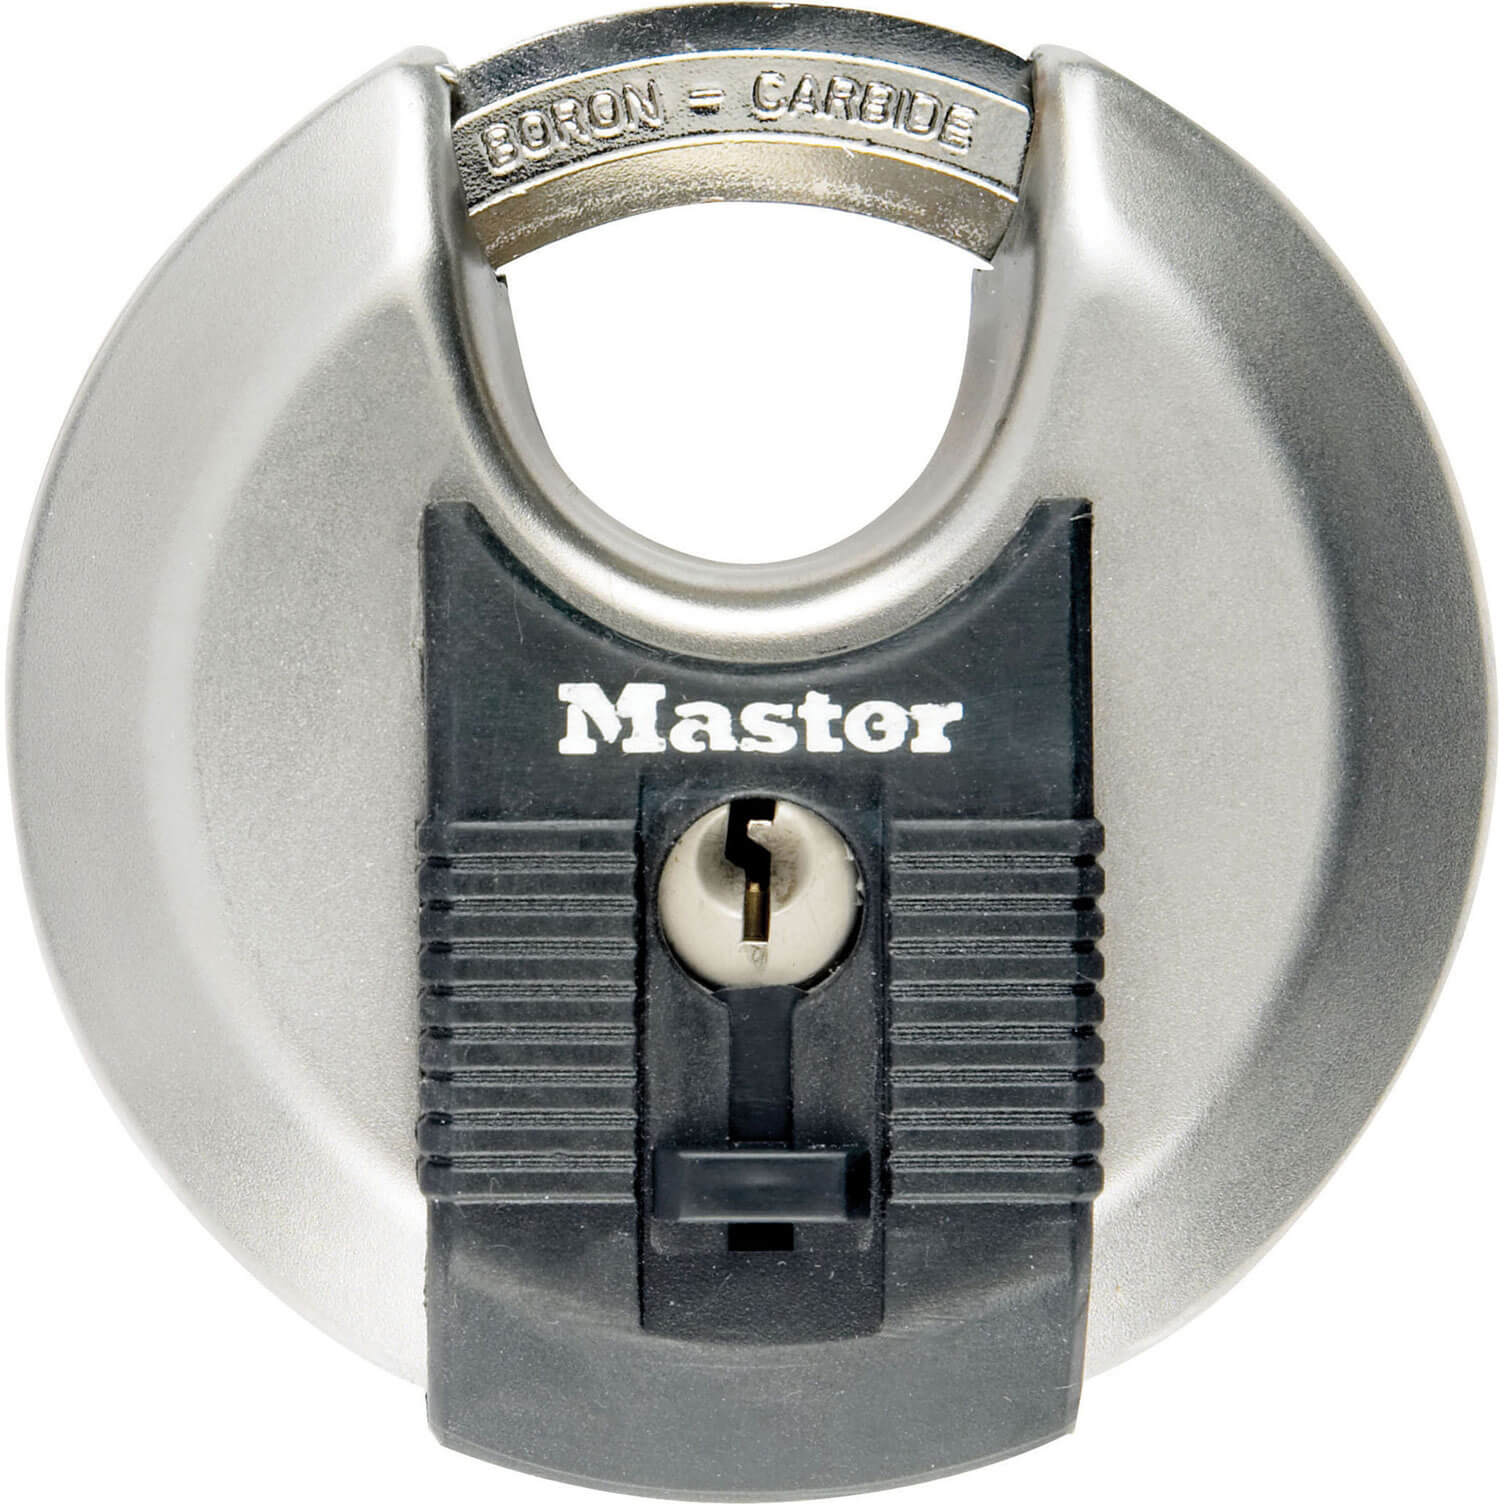 Image of Masterlock Excell Stainless Steel Discus Padlock 80mm Standard